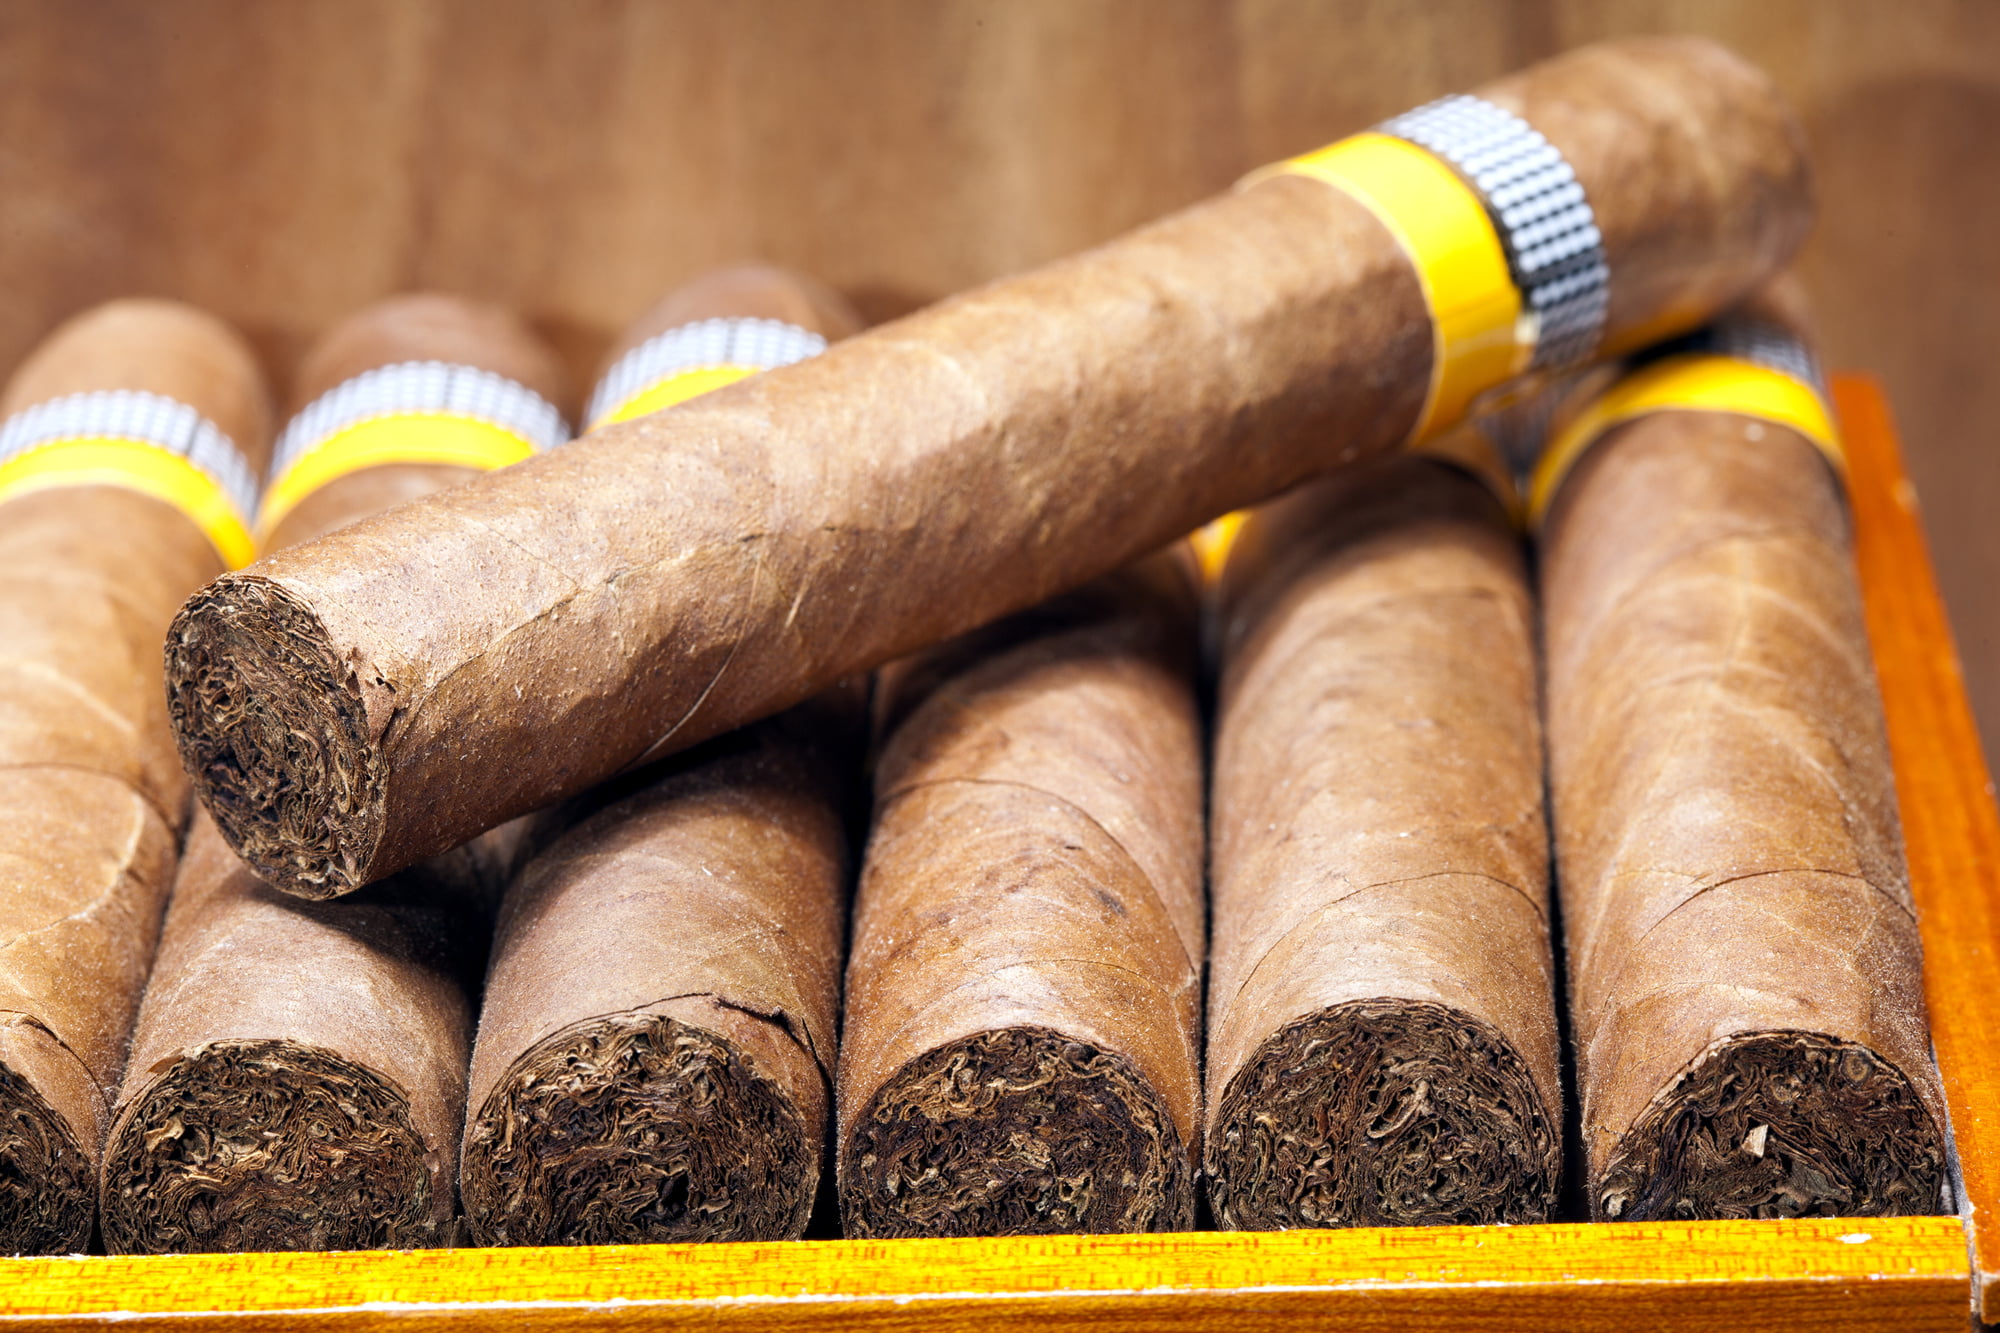 Are you looking for your new favorite cigar? Click here for a complete guide to the different types of cigars to find your match.